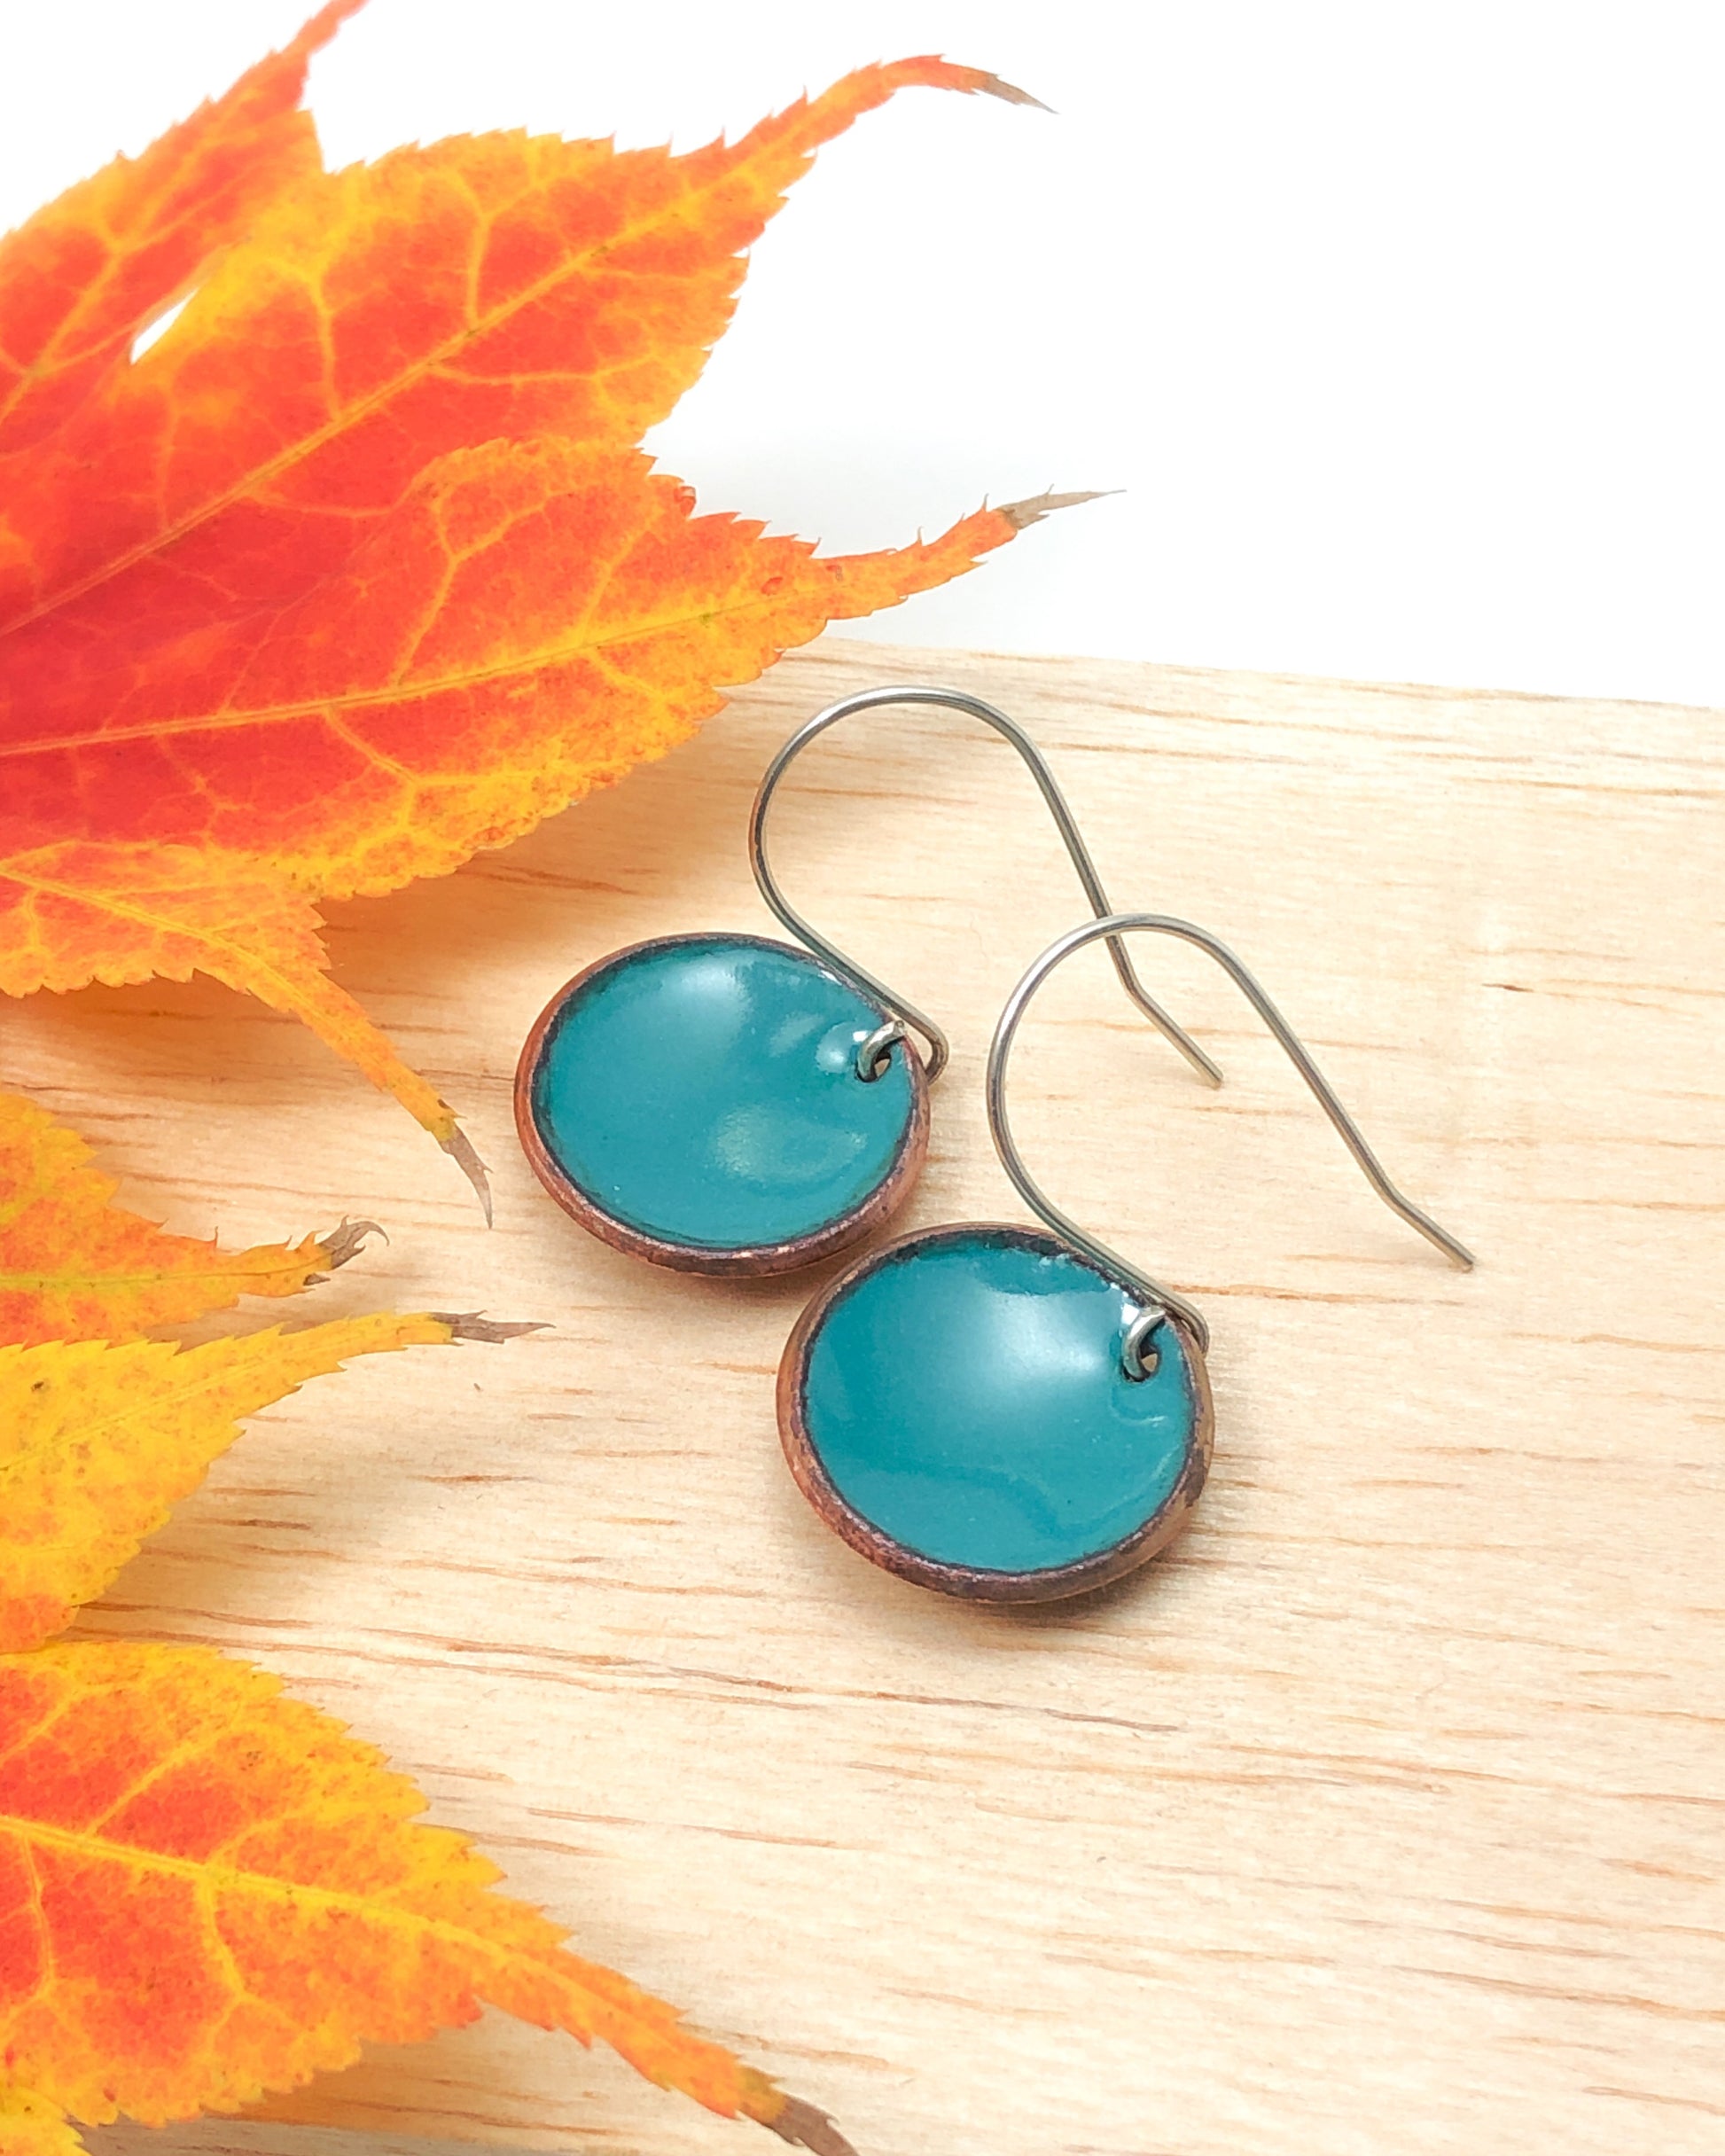 a pair of blue earrings sitting on top of a wooden table